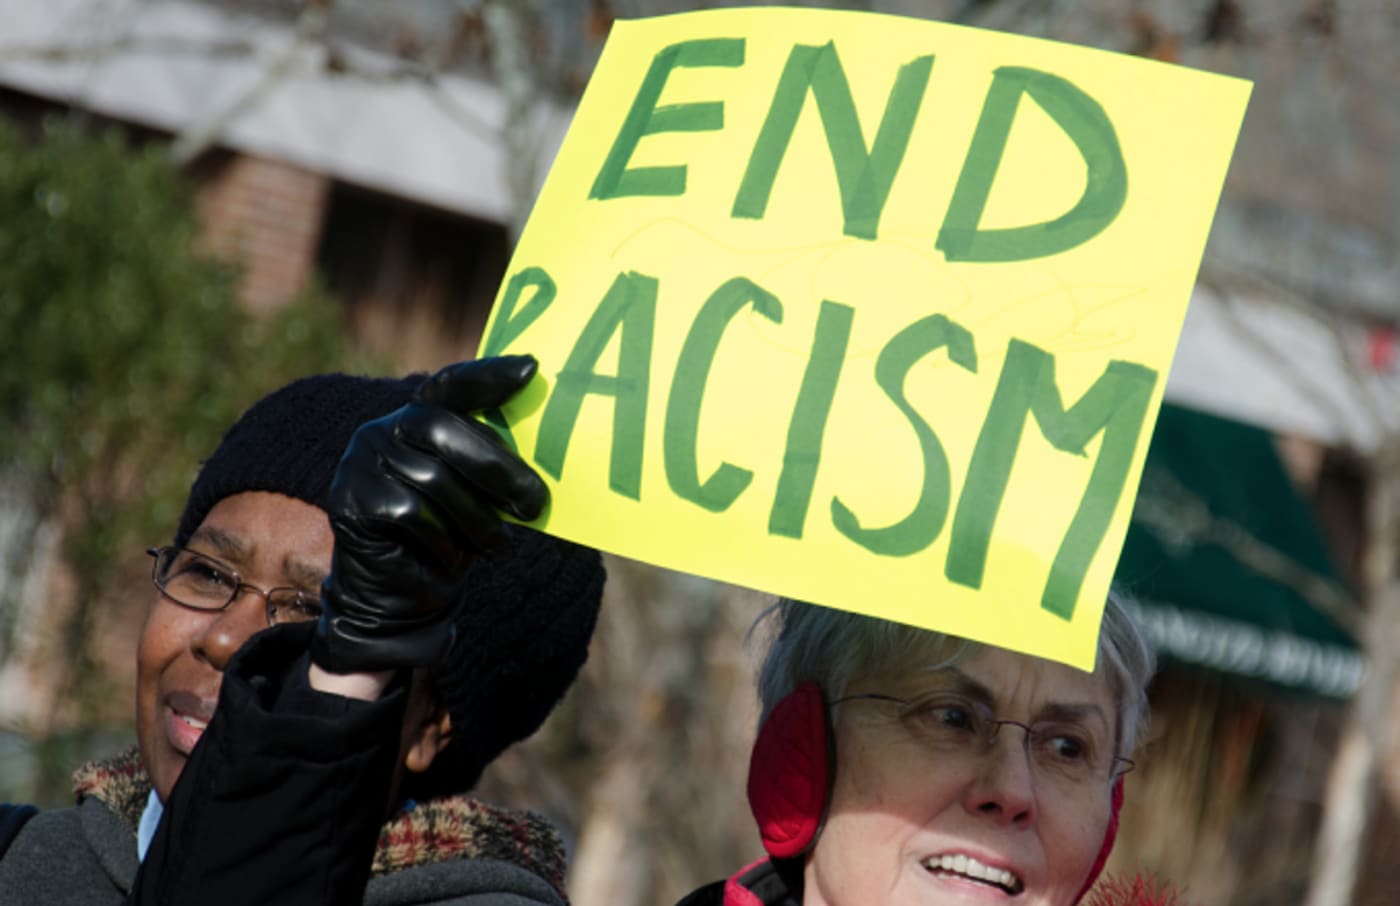 Most Americans Agree That Race Relations Have Worsened in 2015